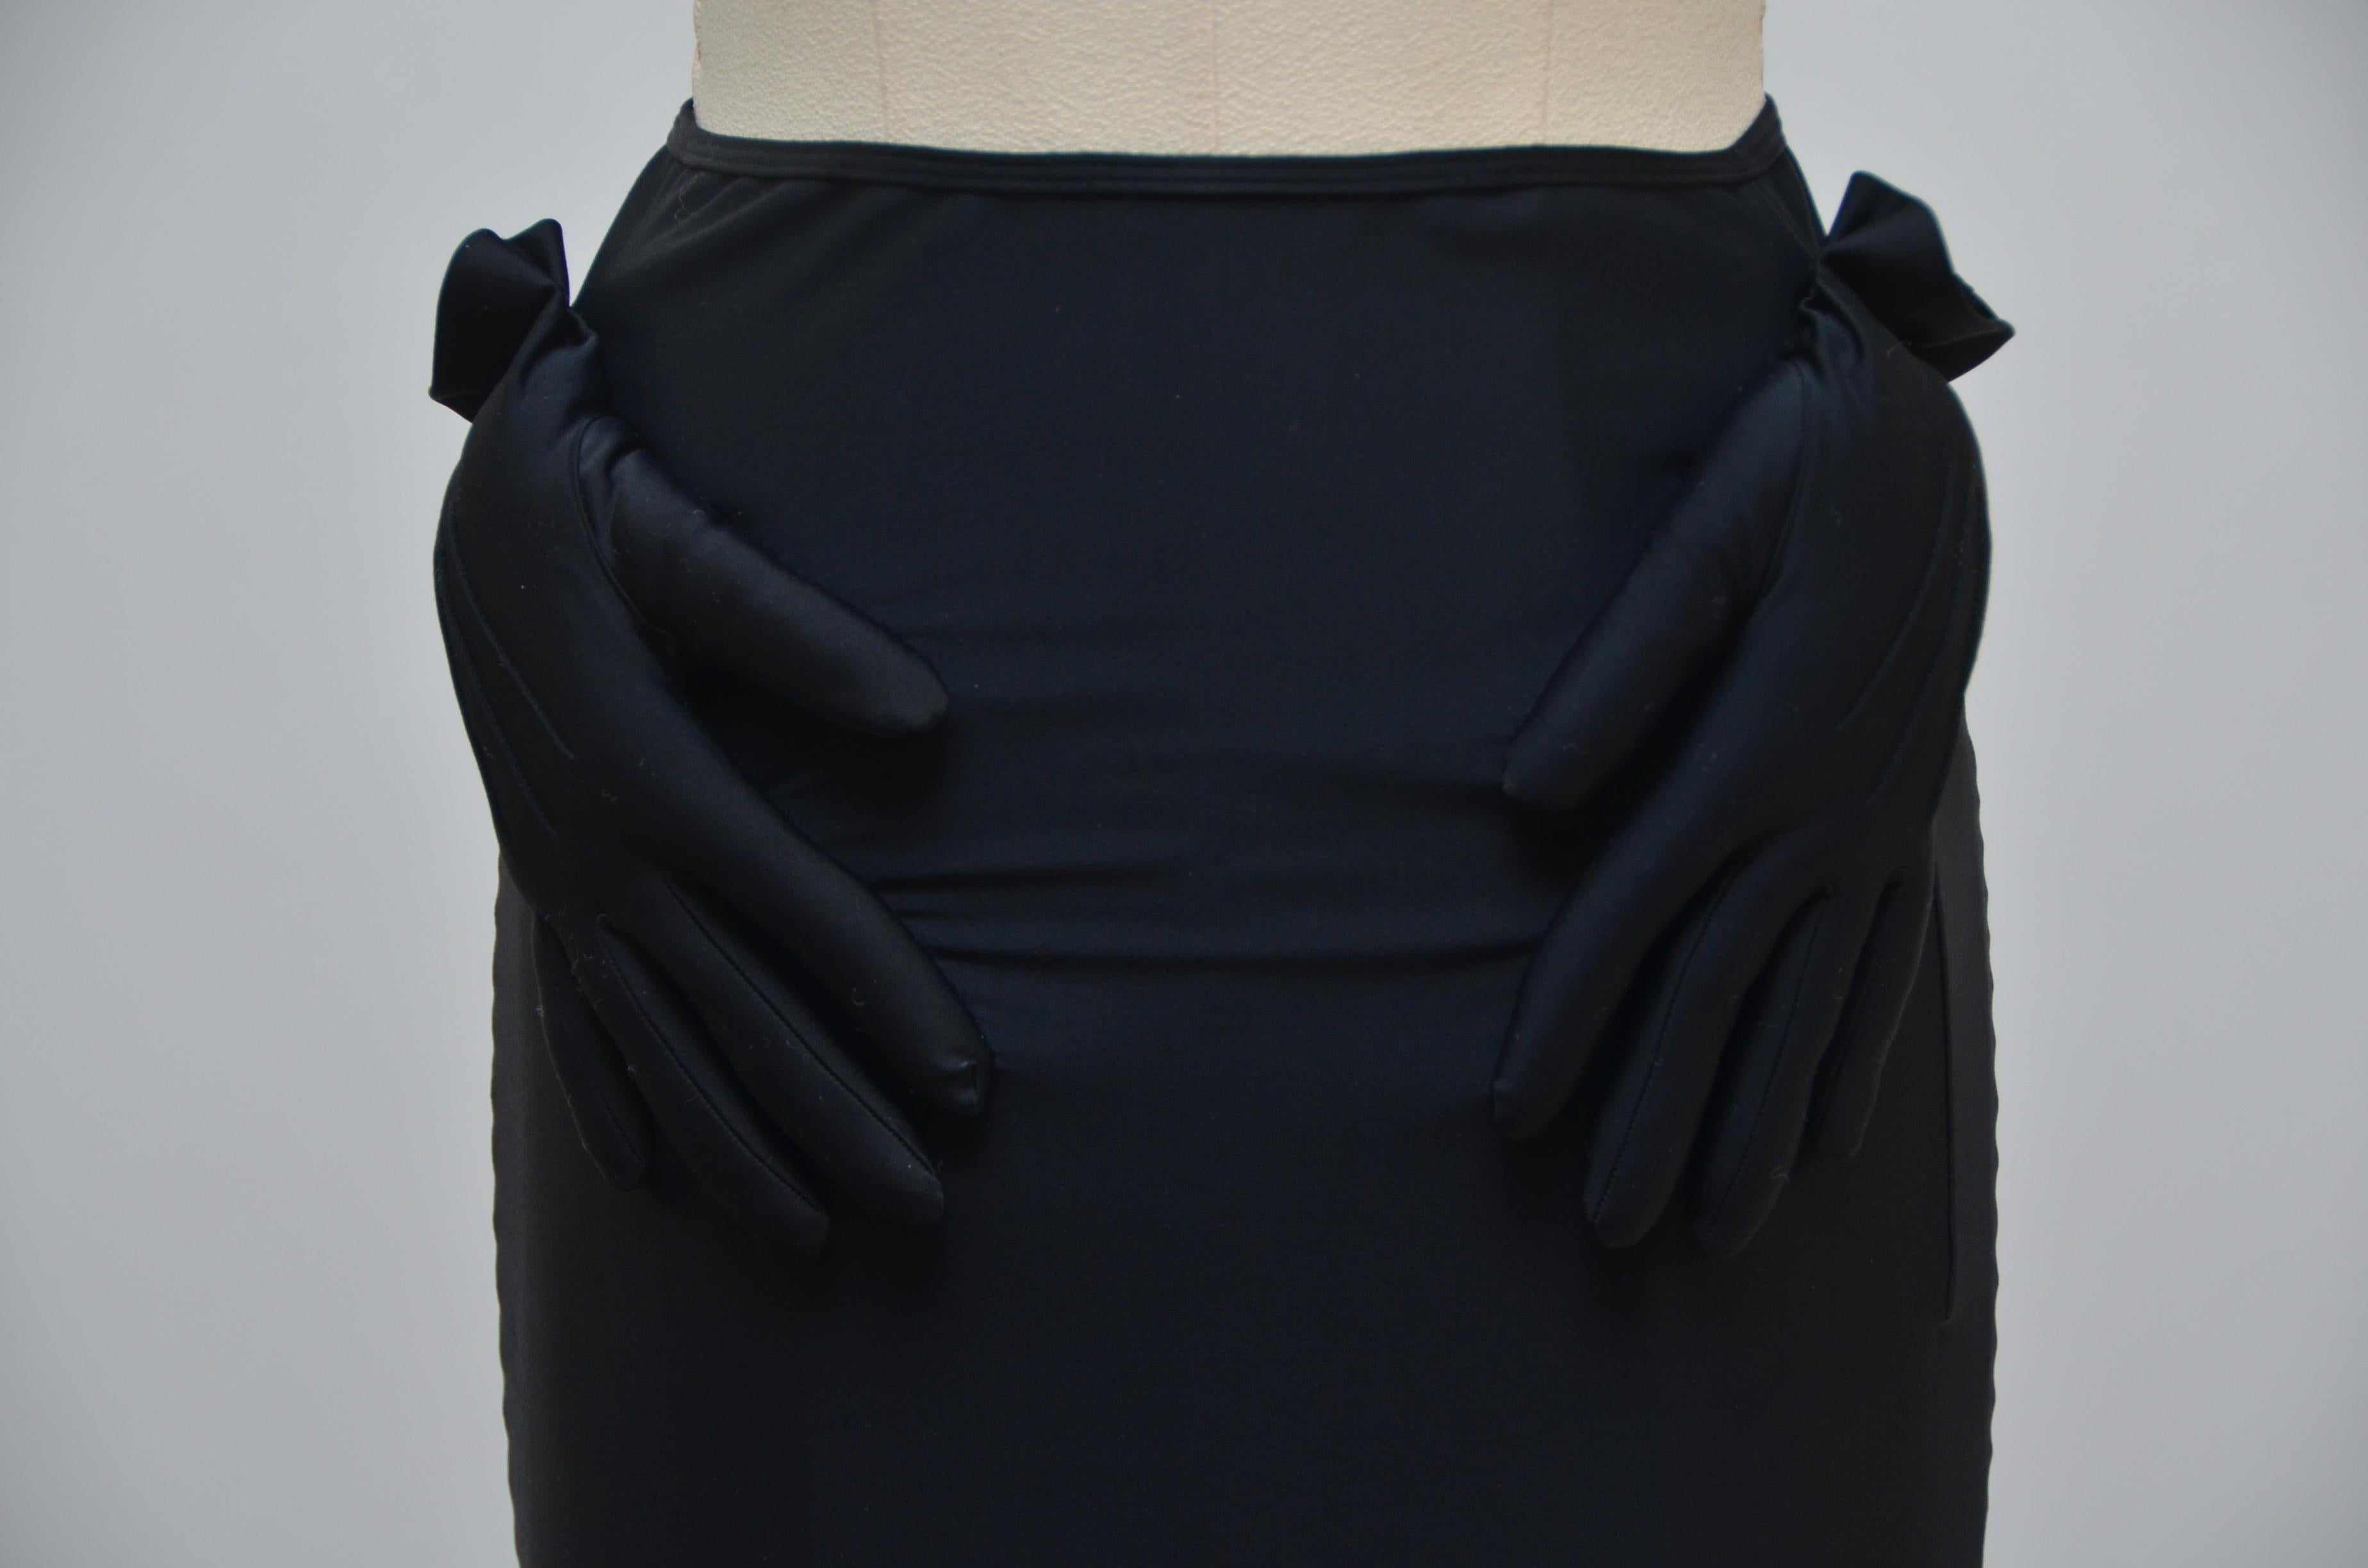 CDG black spandex skirt with gloves.
Excellet condition.
Please note:there is a long seam on the back of the skirt and thats how originally this skirt was made.
Skirt was never altered.
Size S.
Made in Japan.

FINAL SALE.